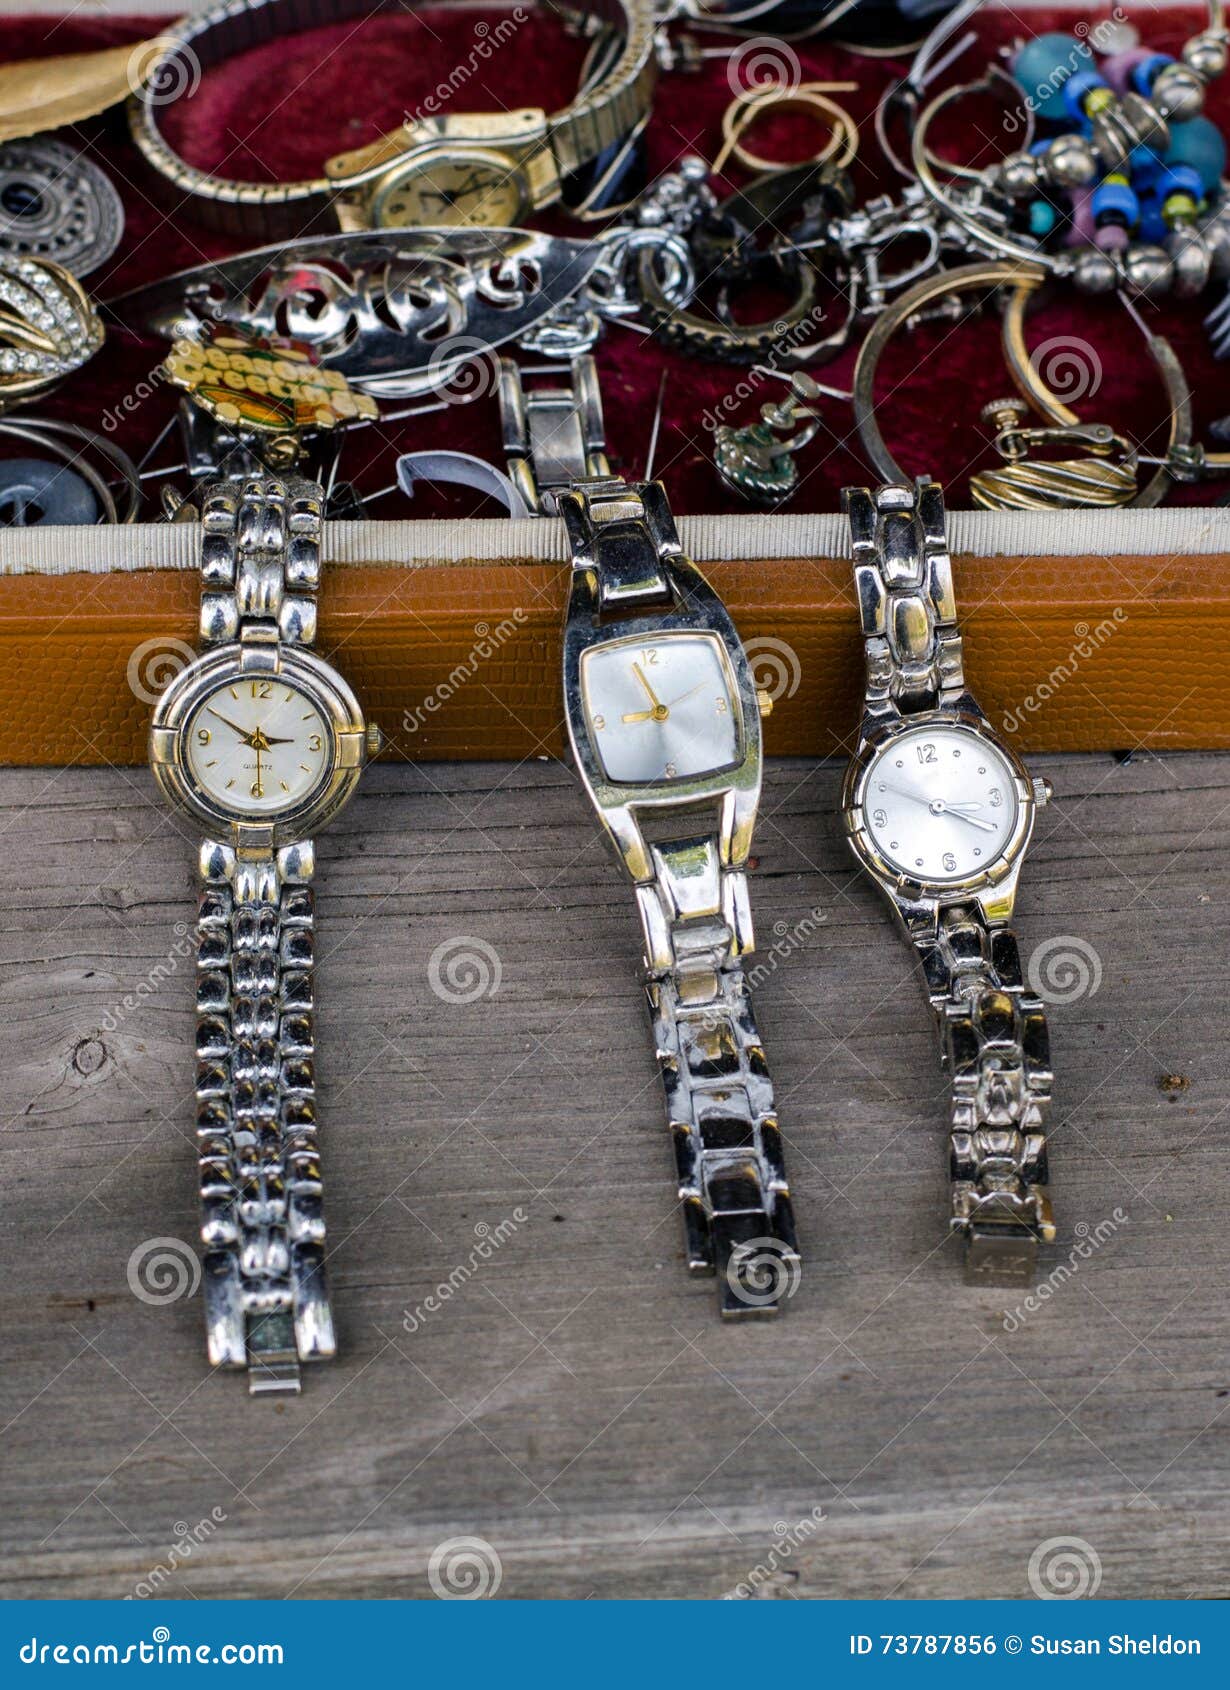 Antique Watches and Costume Jewelry Editorial Photo - Image of ...